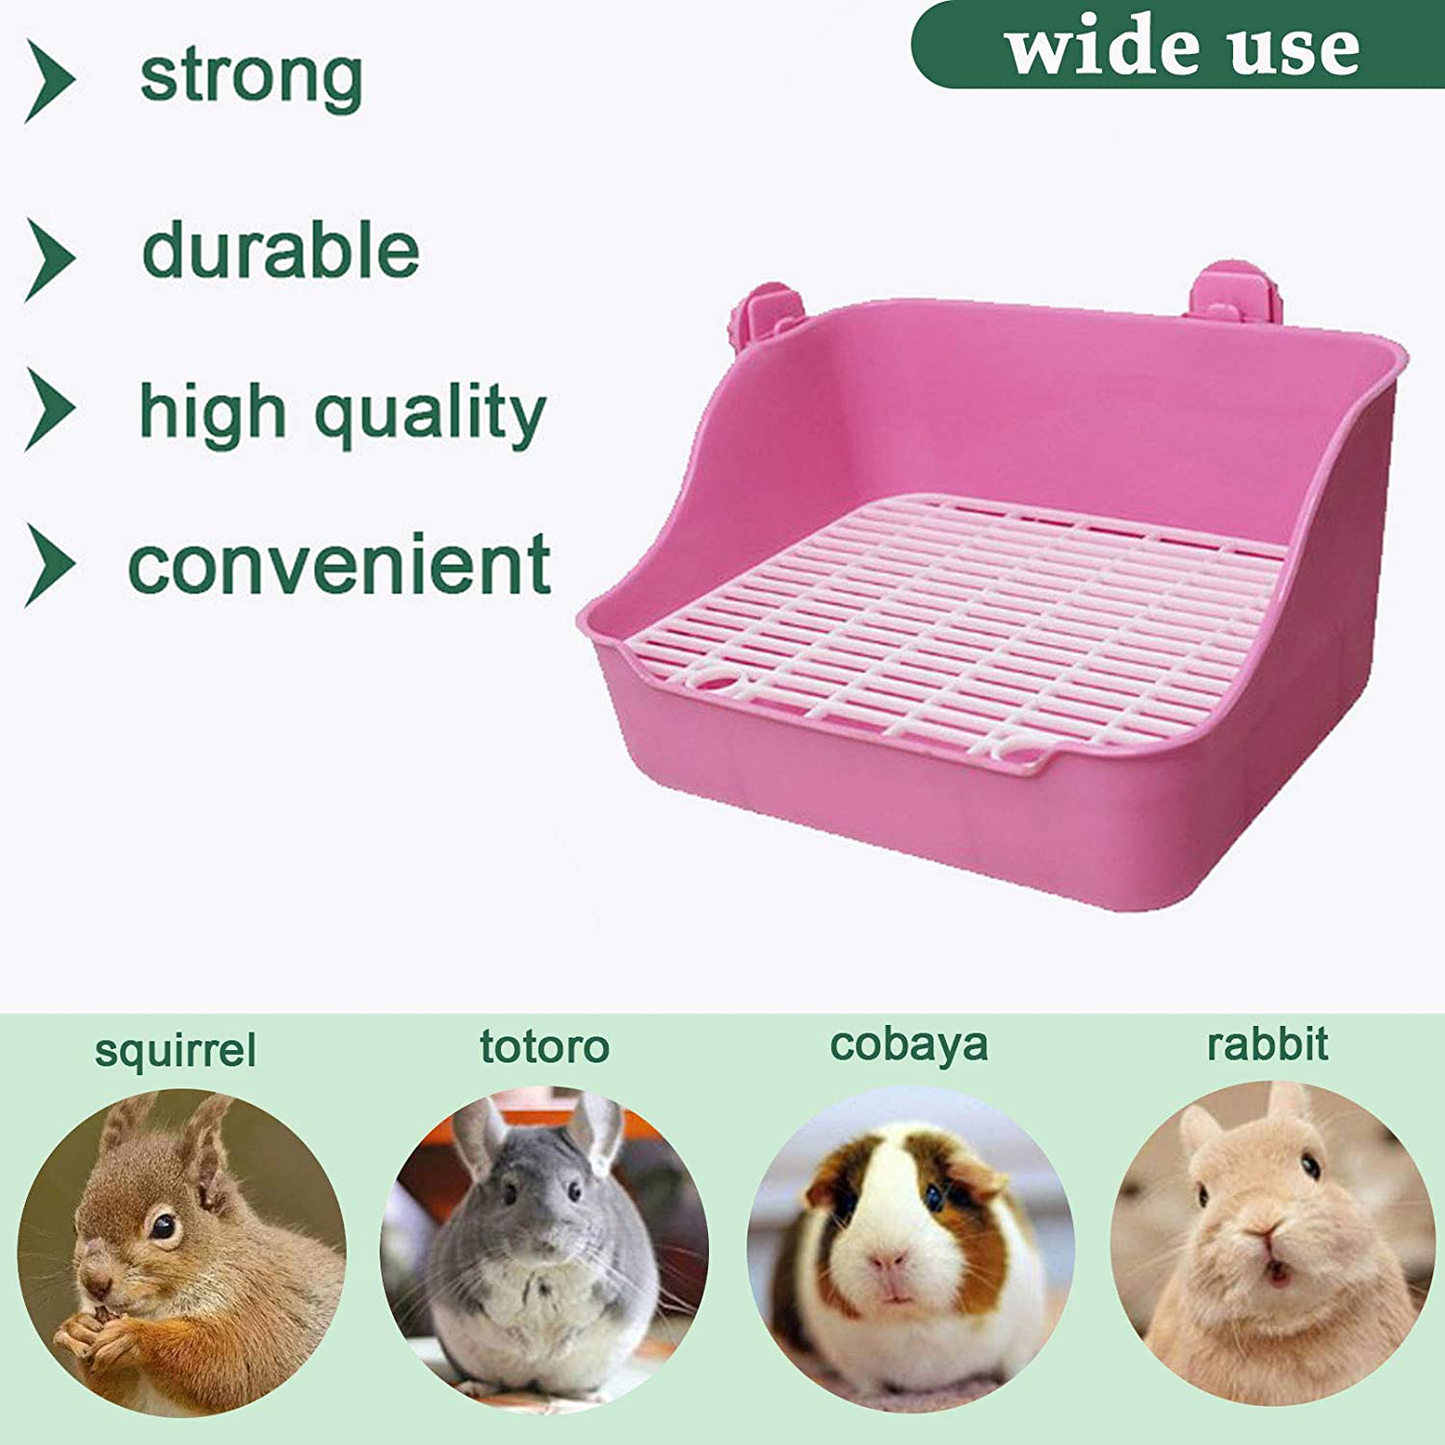 Small Animal Rabbit Litter Toilet, Plastic Square Cage Box, Corner Pan with Grate, Potty Training for Bunny, Guinea Pigs, Chinchilla, Ferret, Galesaur, Hamster Animals & Pet Supplies > Pet Supplies > Small Animal Supplies > Small Animal Bedding Hamiledyi   